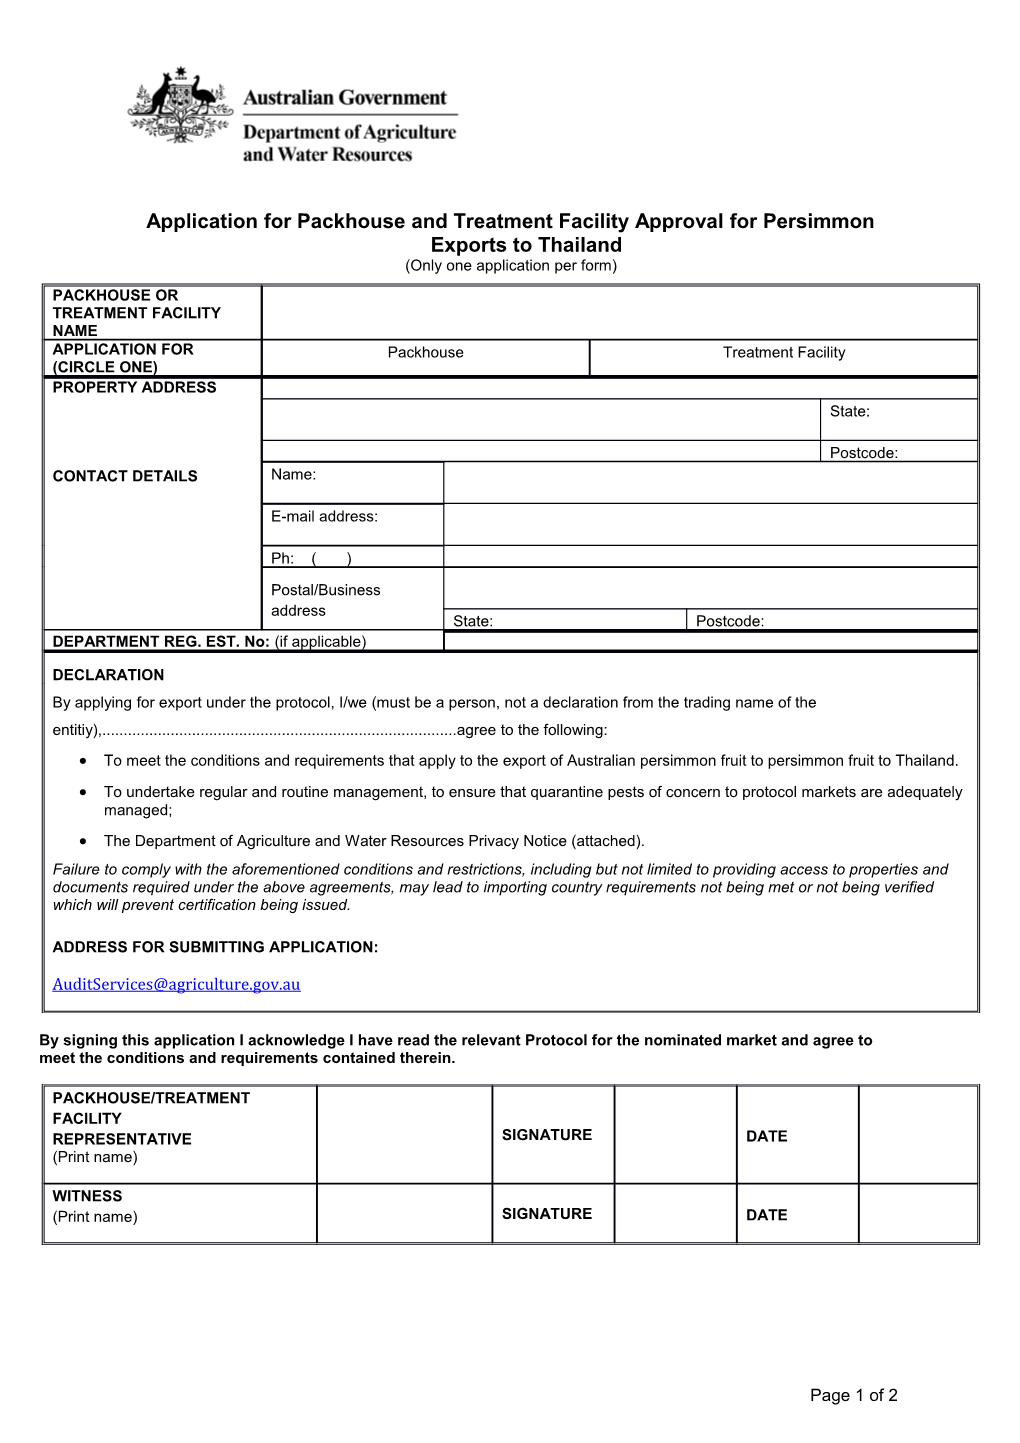 Application for Packhouse and Treatment Facility Approval for Persimmon Exports to Thailand